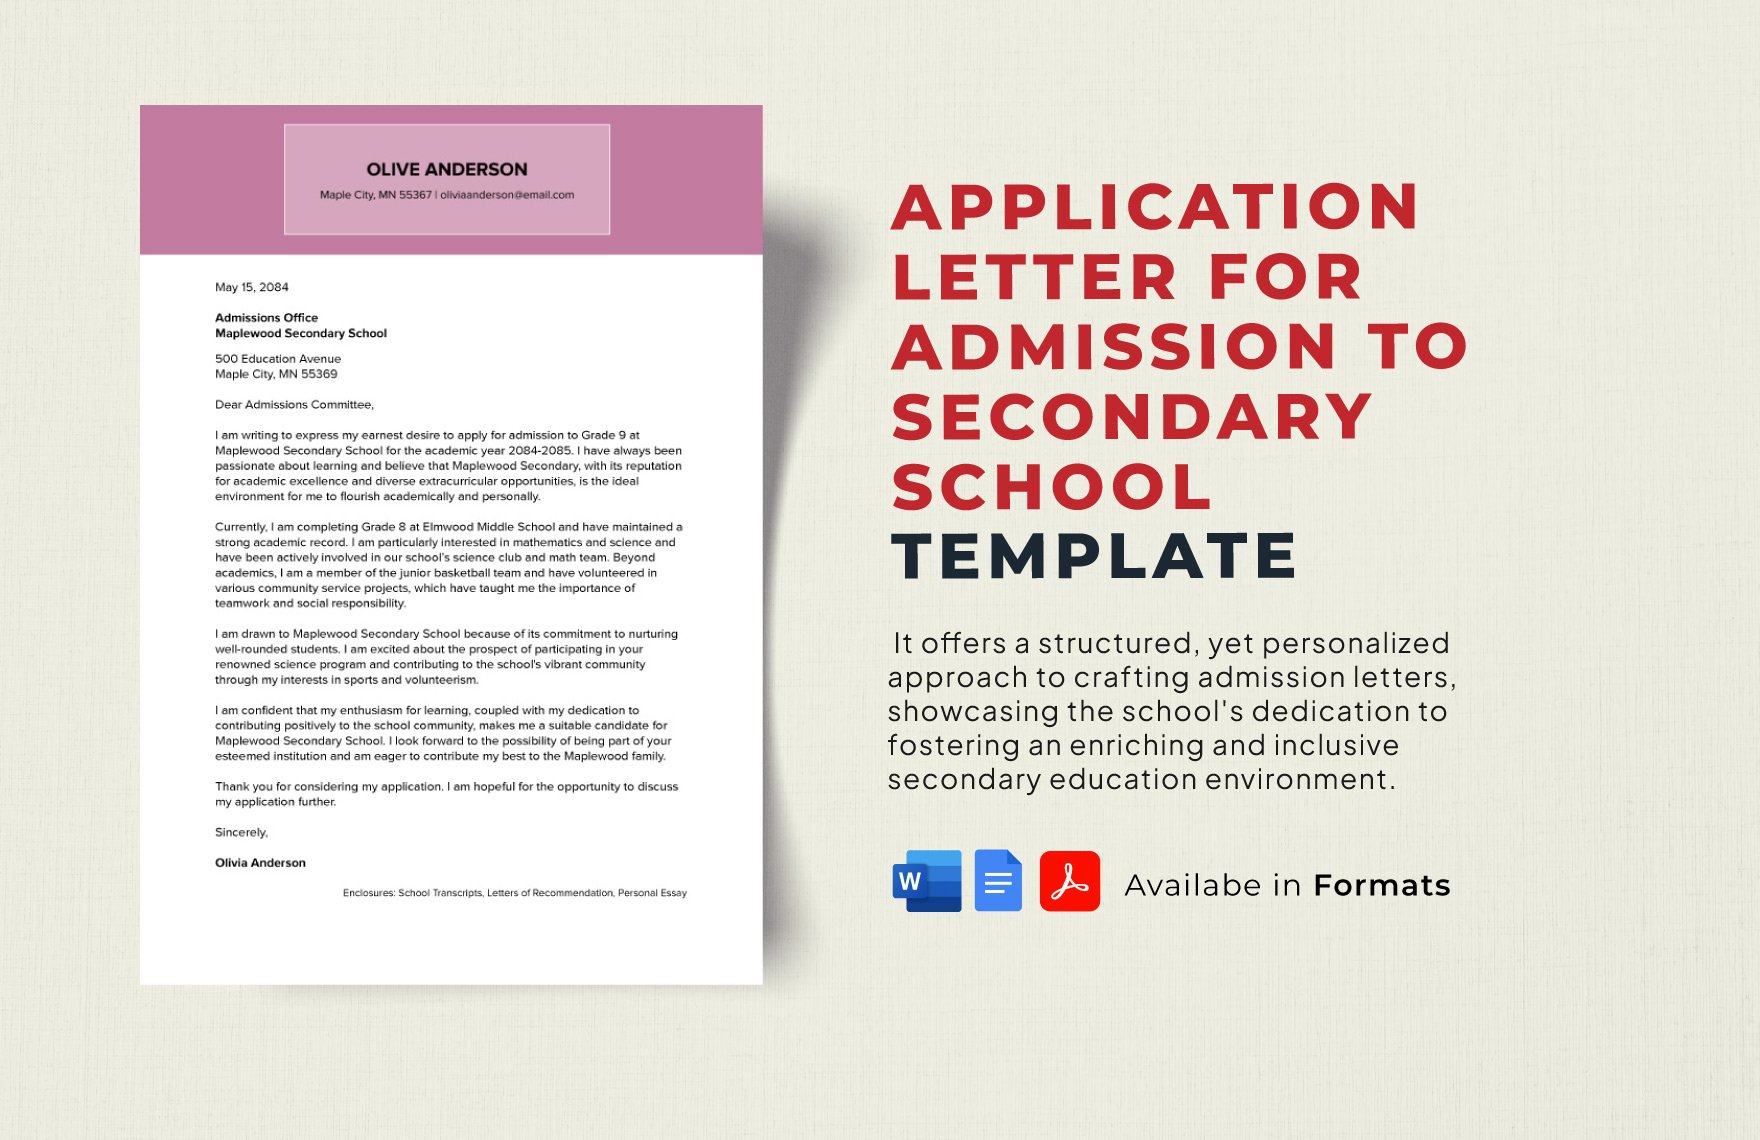 Application Letter for Admission to Secondary School Template